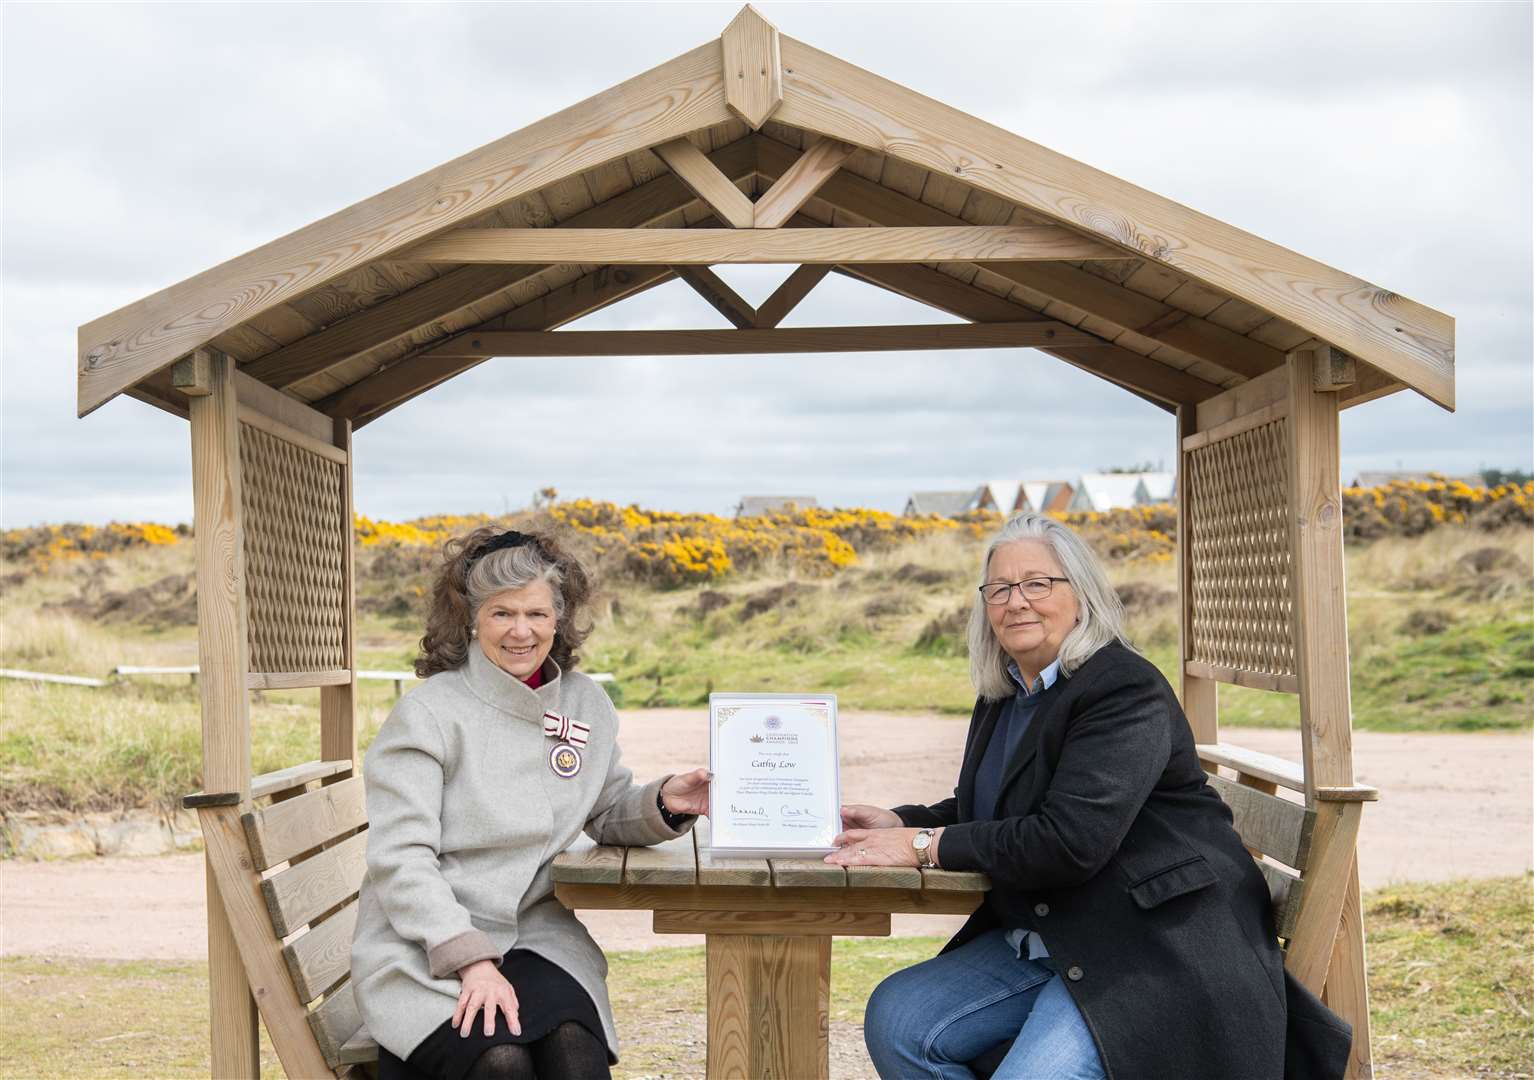 Cathy Low (right) being presented with her certificate by Deputy Lieutenant Sue Finnegan. Picture: Daniel Forsyth